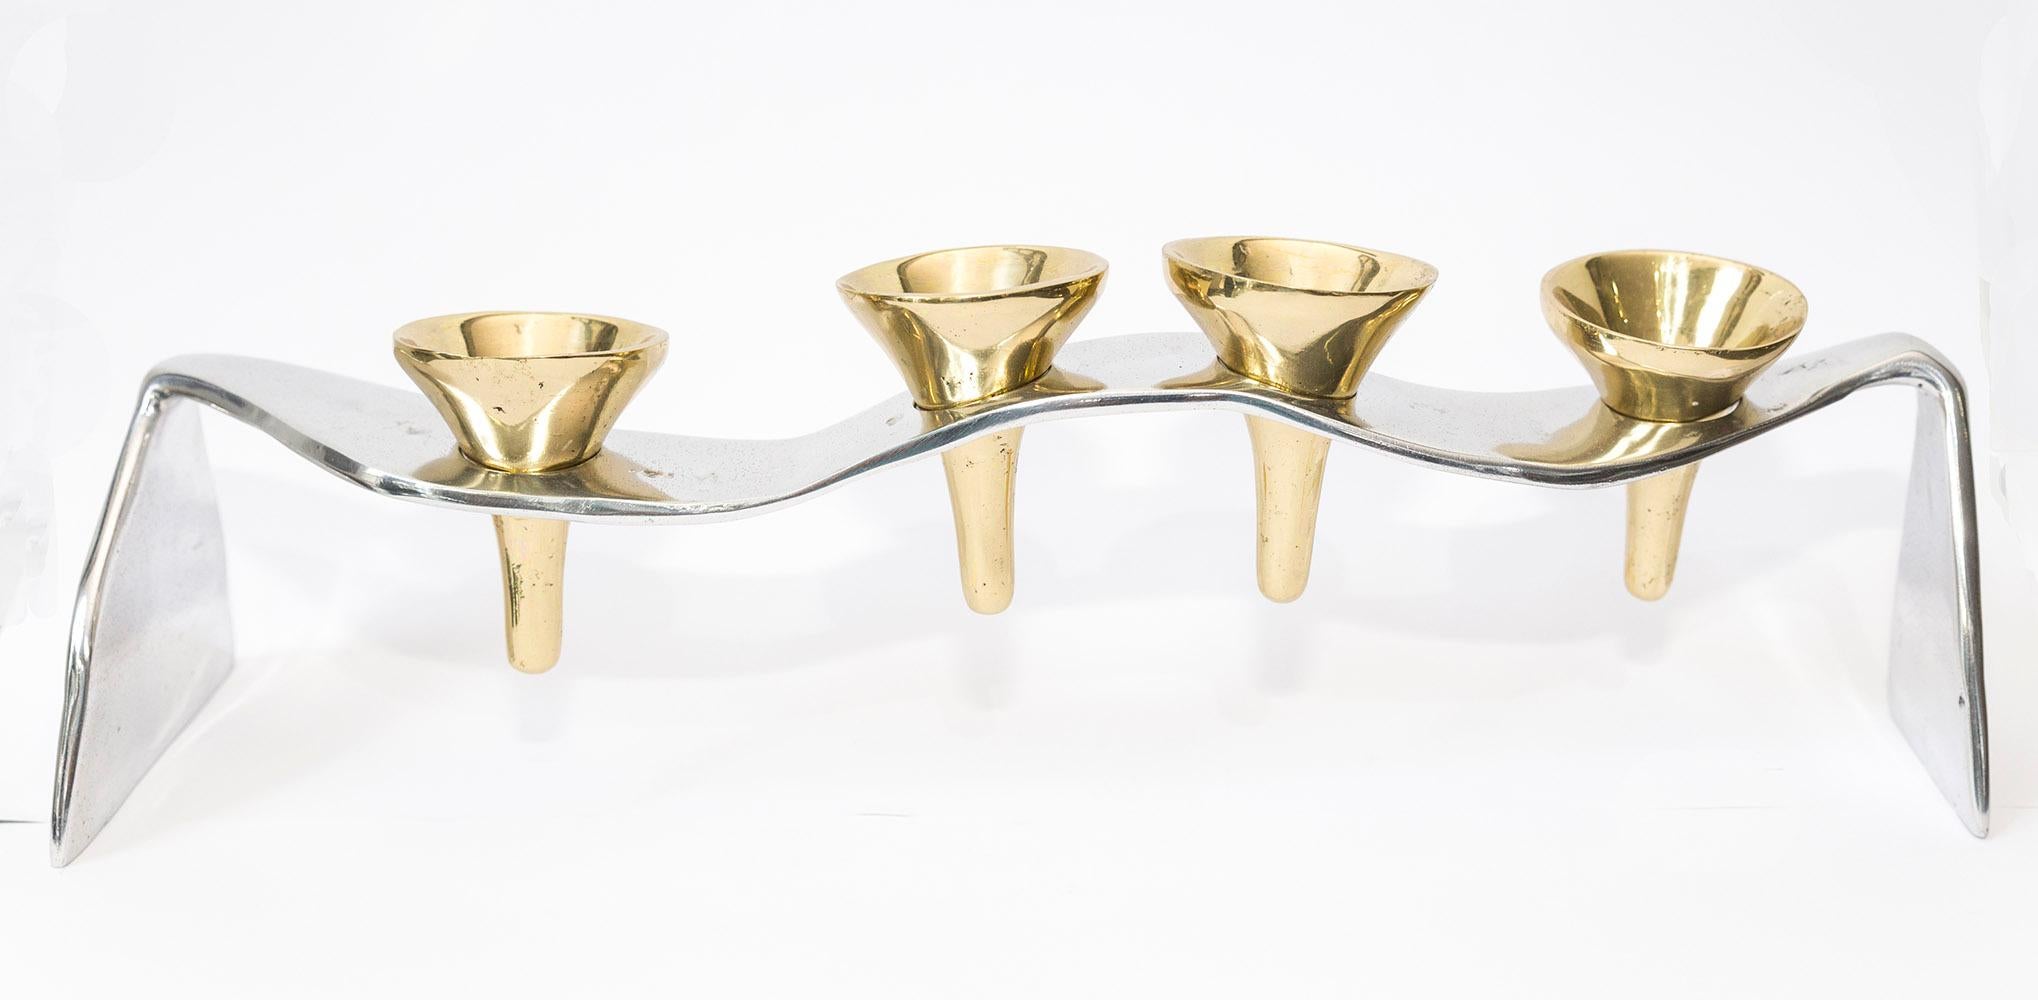 Metal G067 Candelabra Sinuoso, Gold and Silver coloured Brass and Aluminium Handmade For Sale